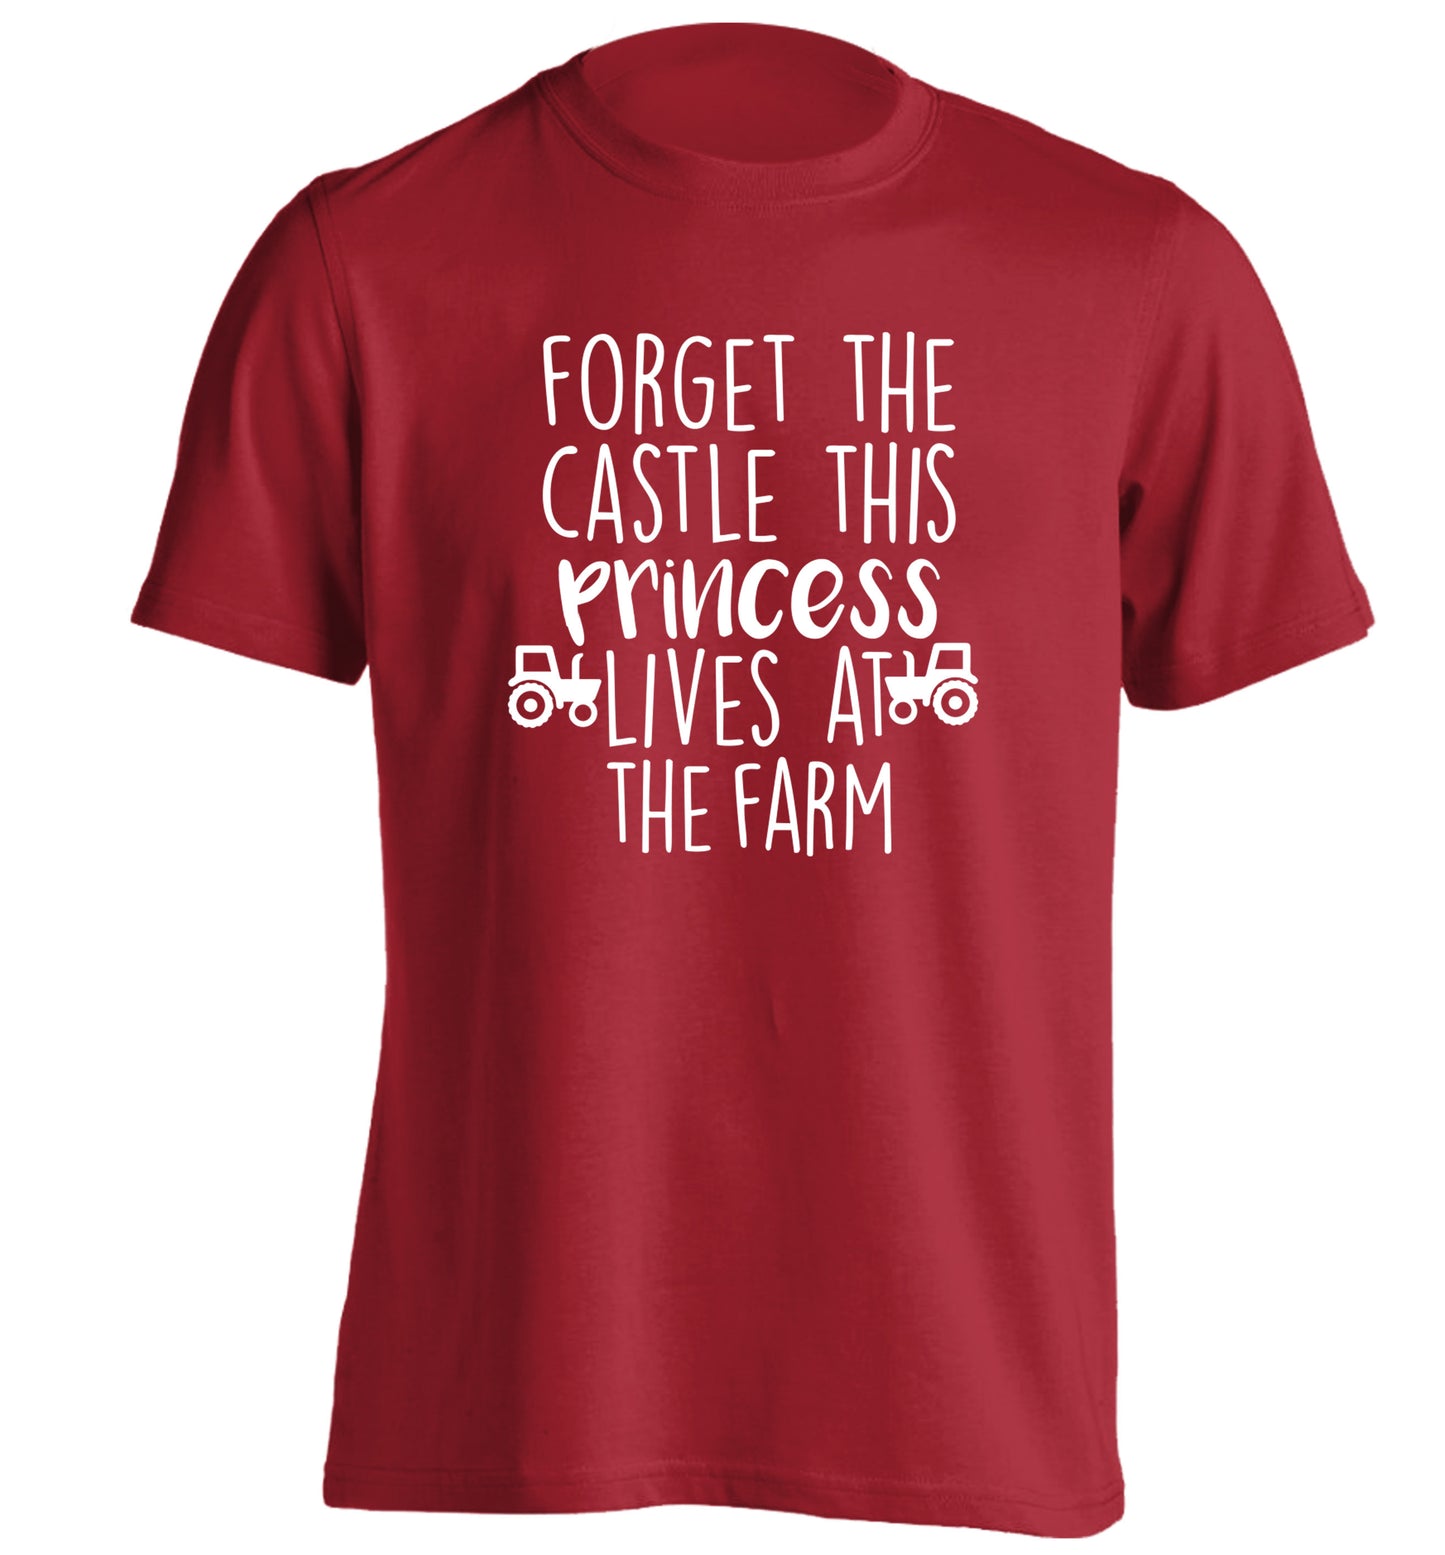 Forget the castle this princess lives at the farm adults unisex red Tshirt 2XL